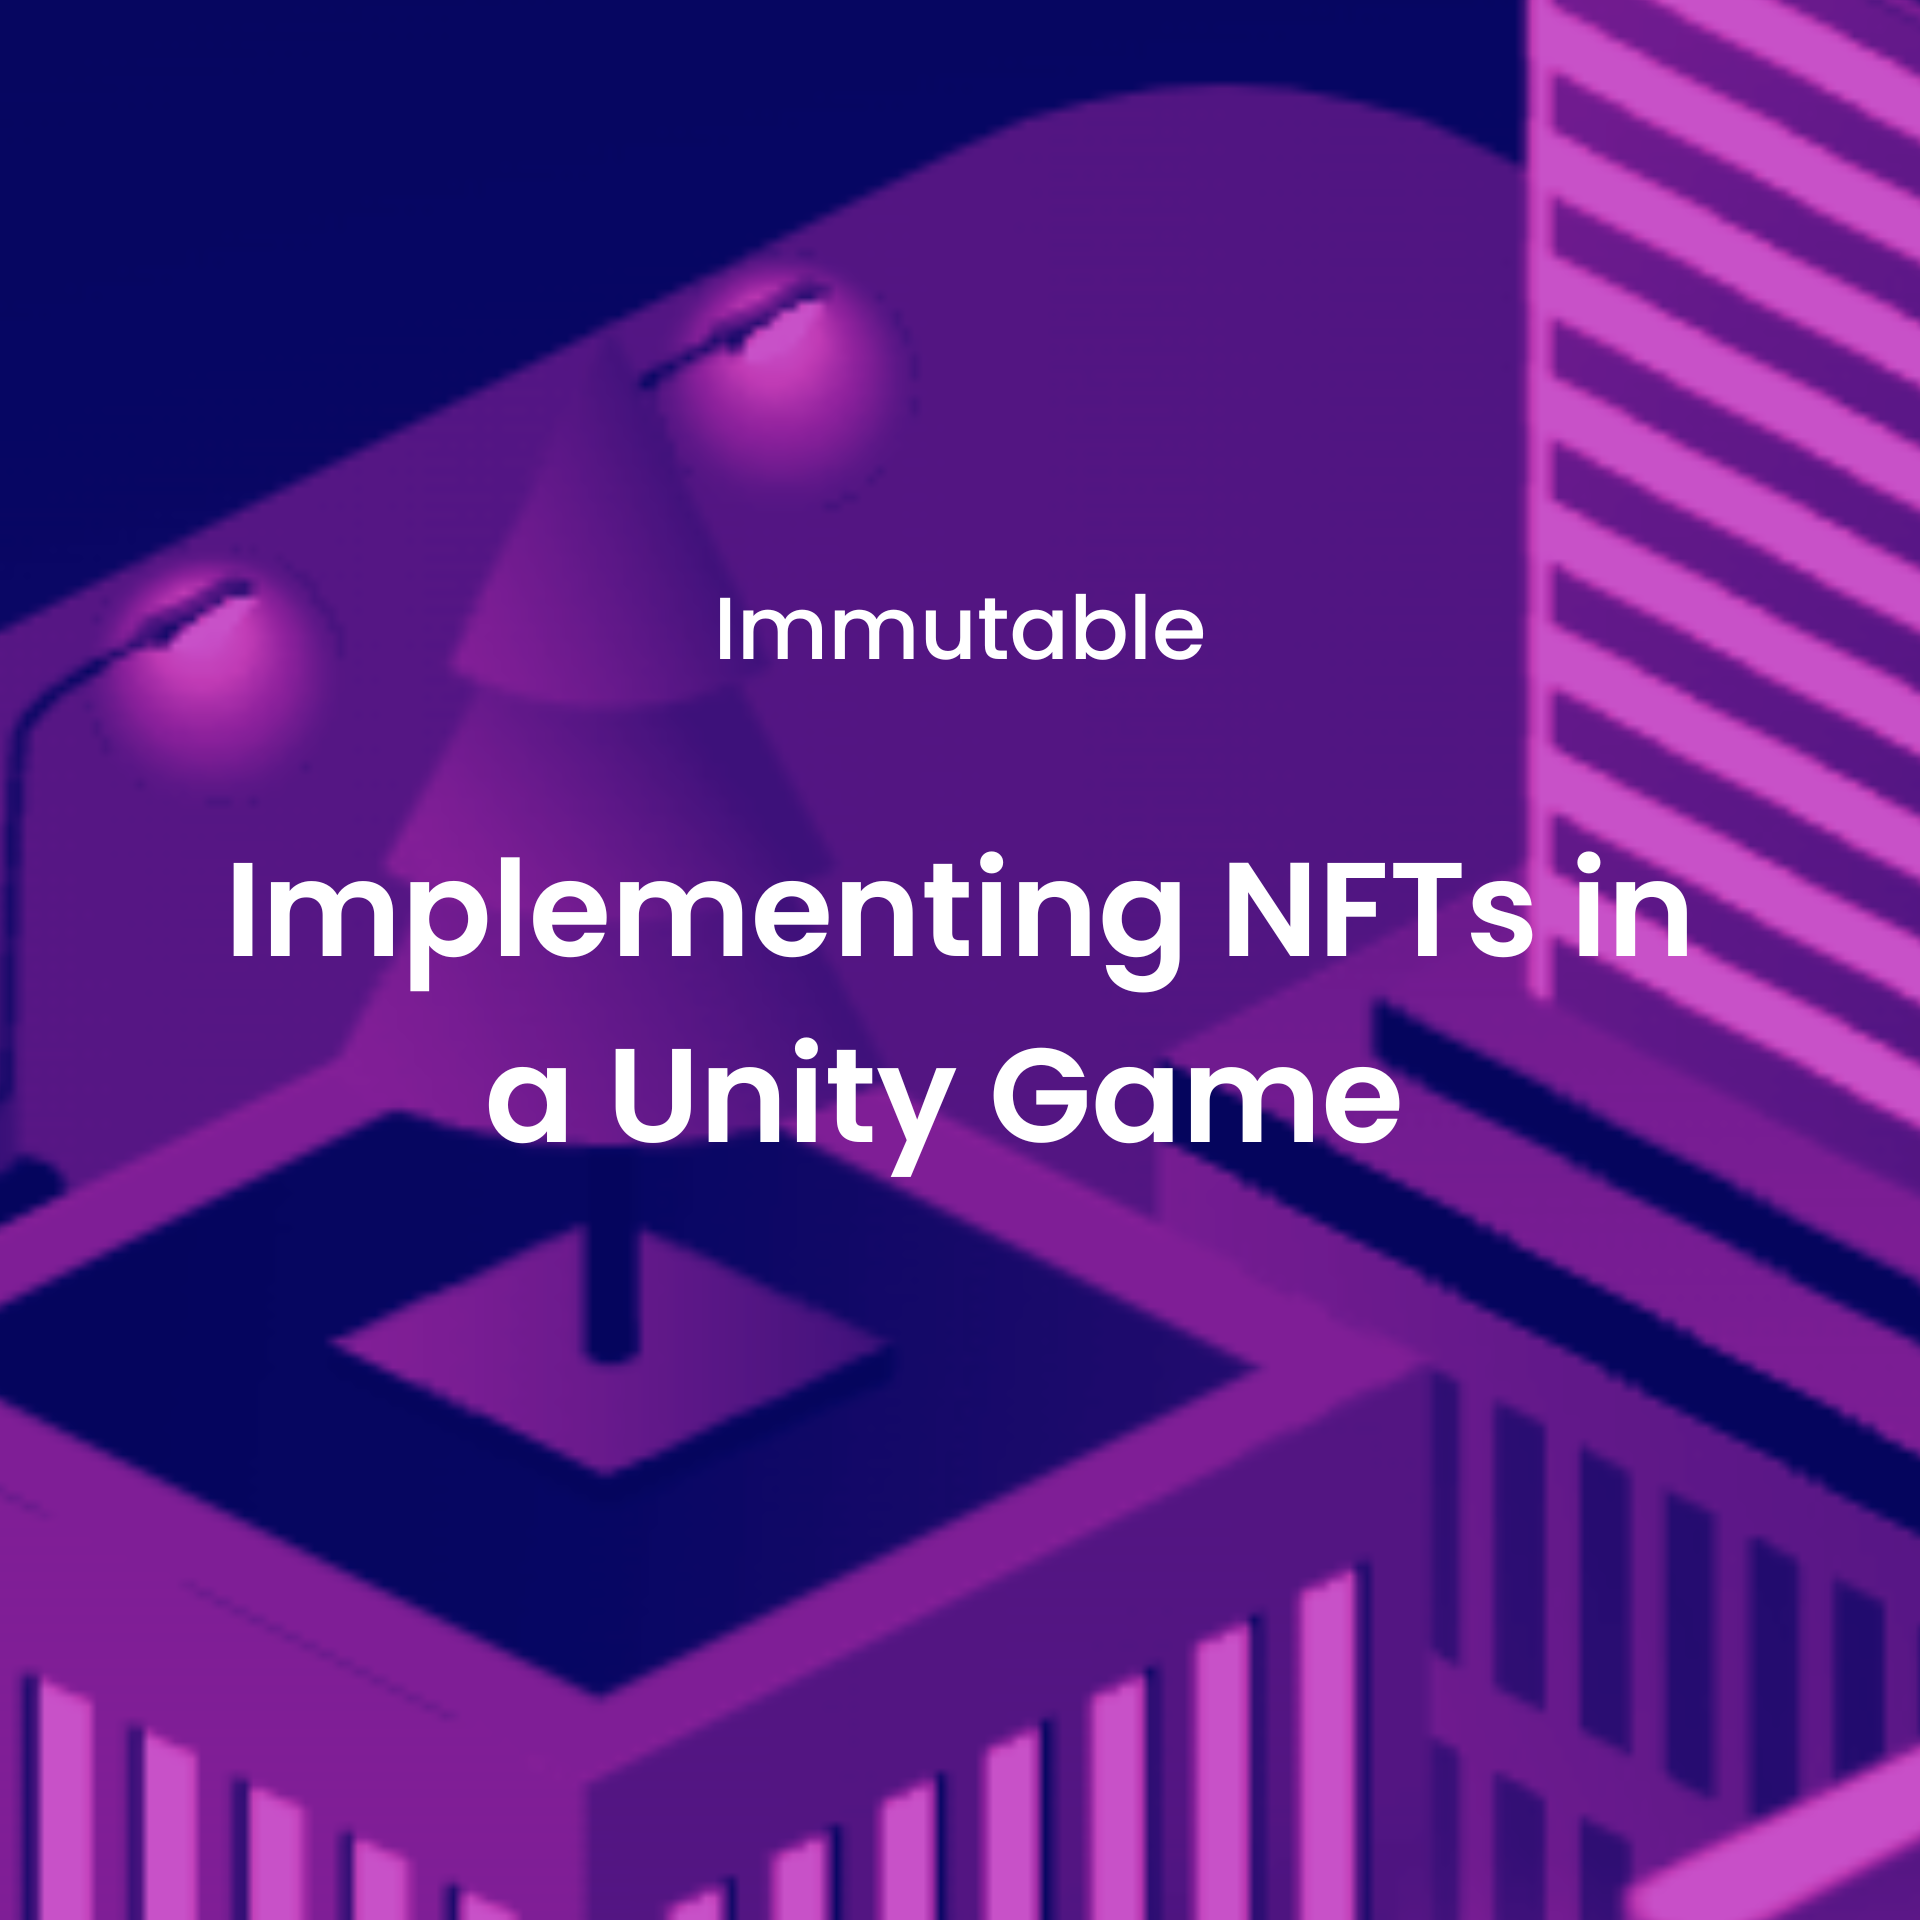 Implementing Immutable NFTs in a Unity Game